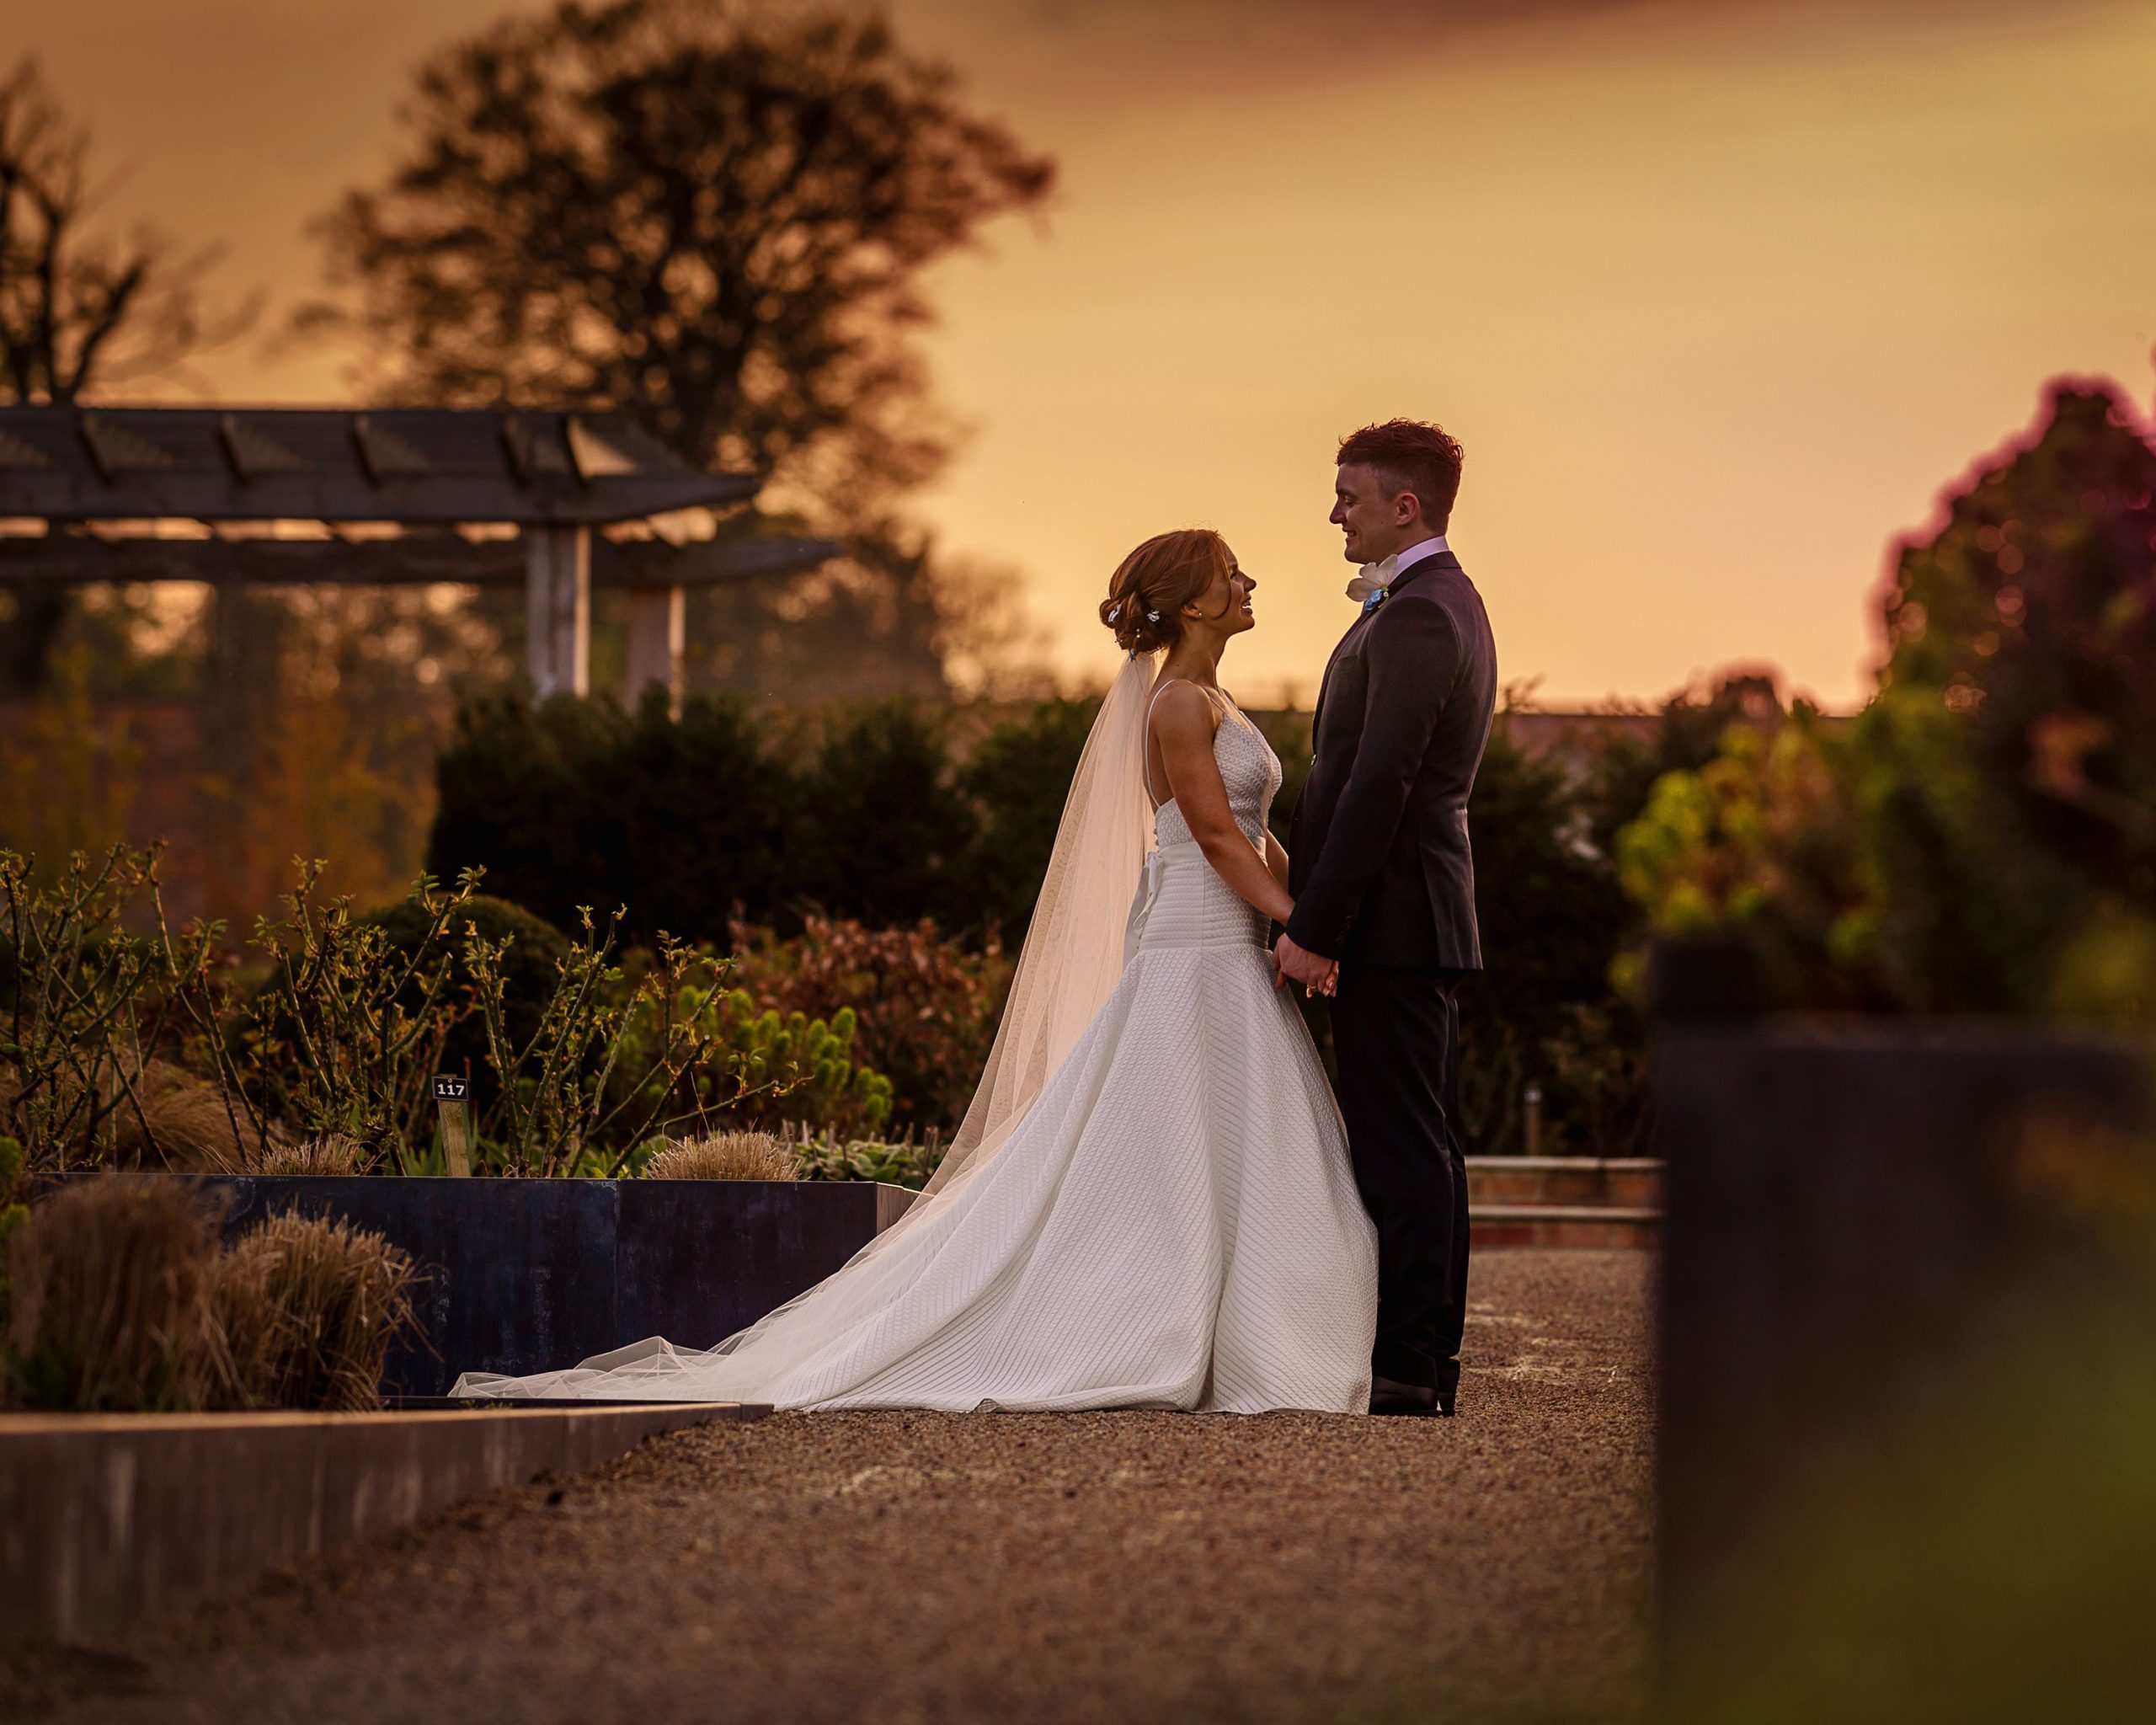 The perfect celebration starts with the perfect venue. Explore our stunning spaces, built for entertaining since the 18th century, modern British menus using home-grown produce and breath-taking views providing a picture perfect backdrop. 